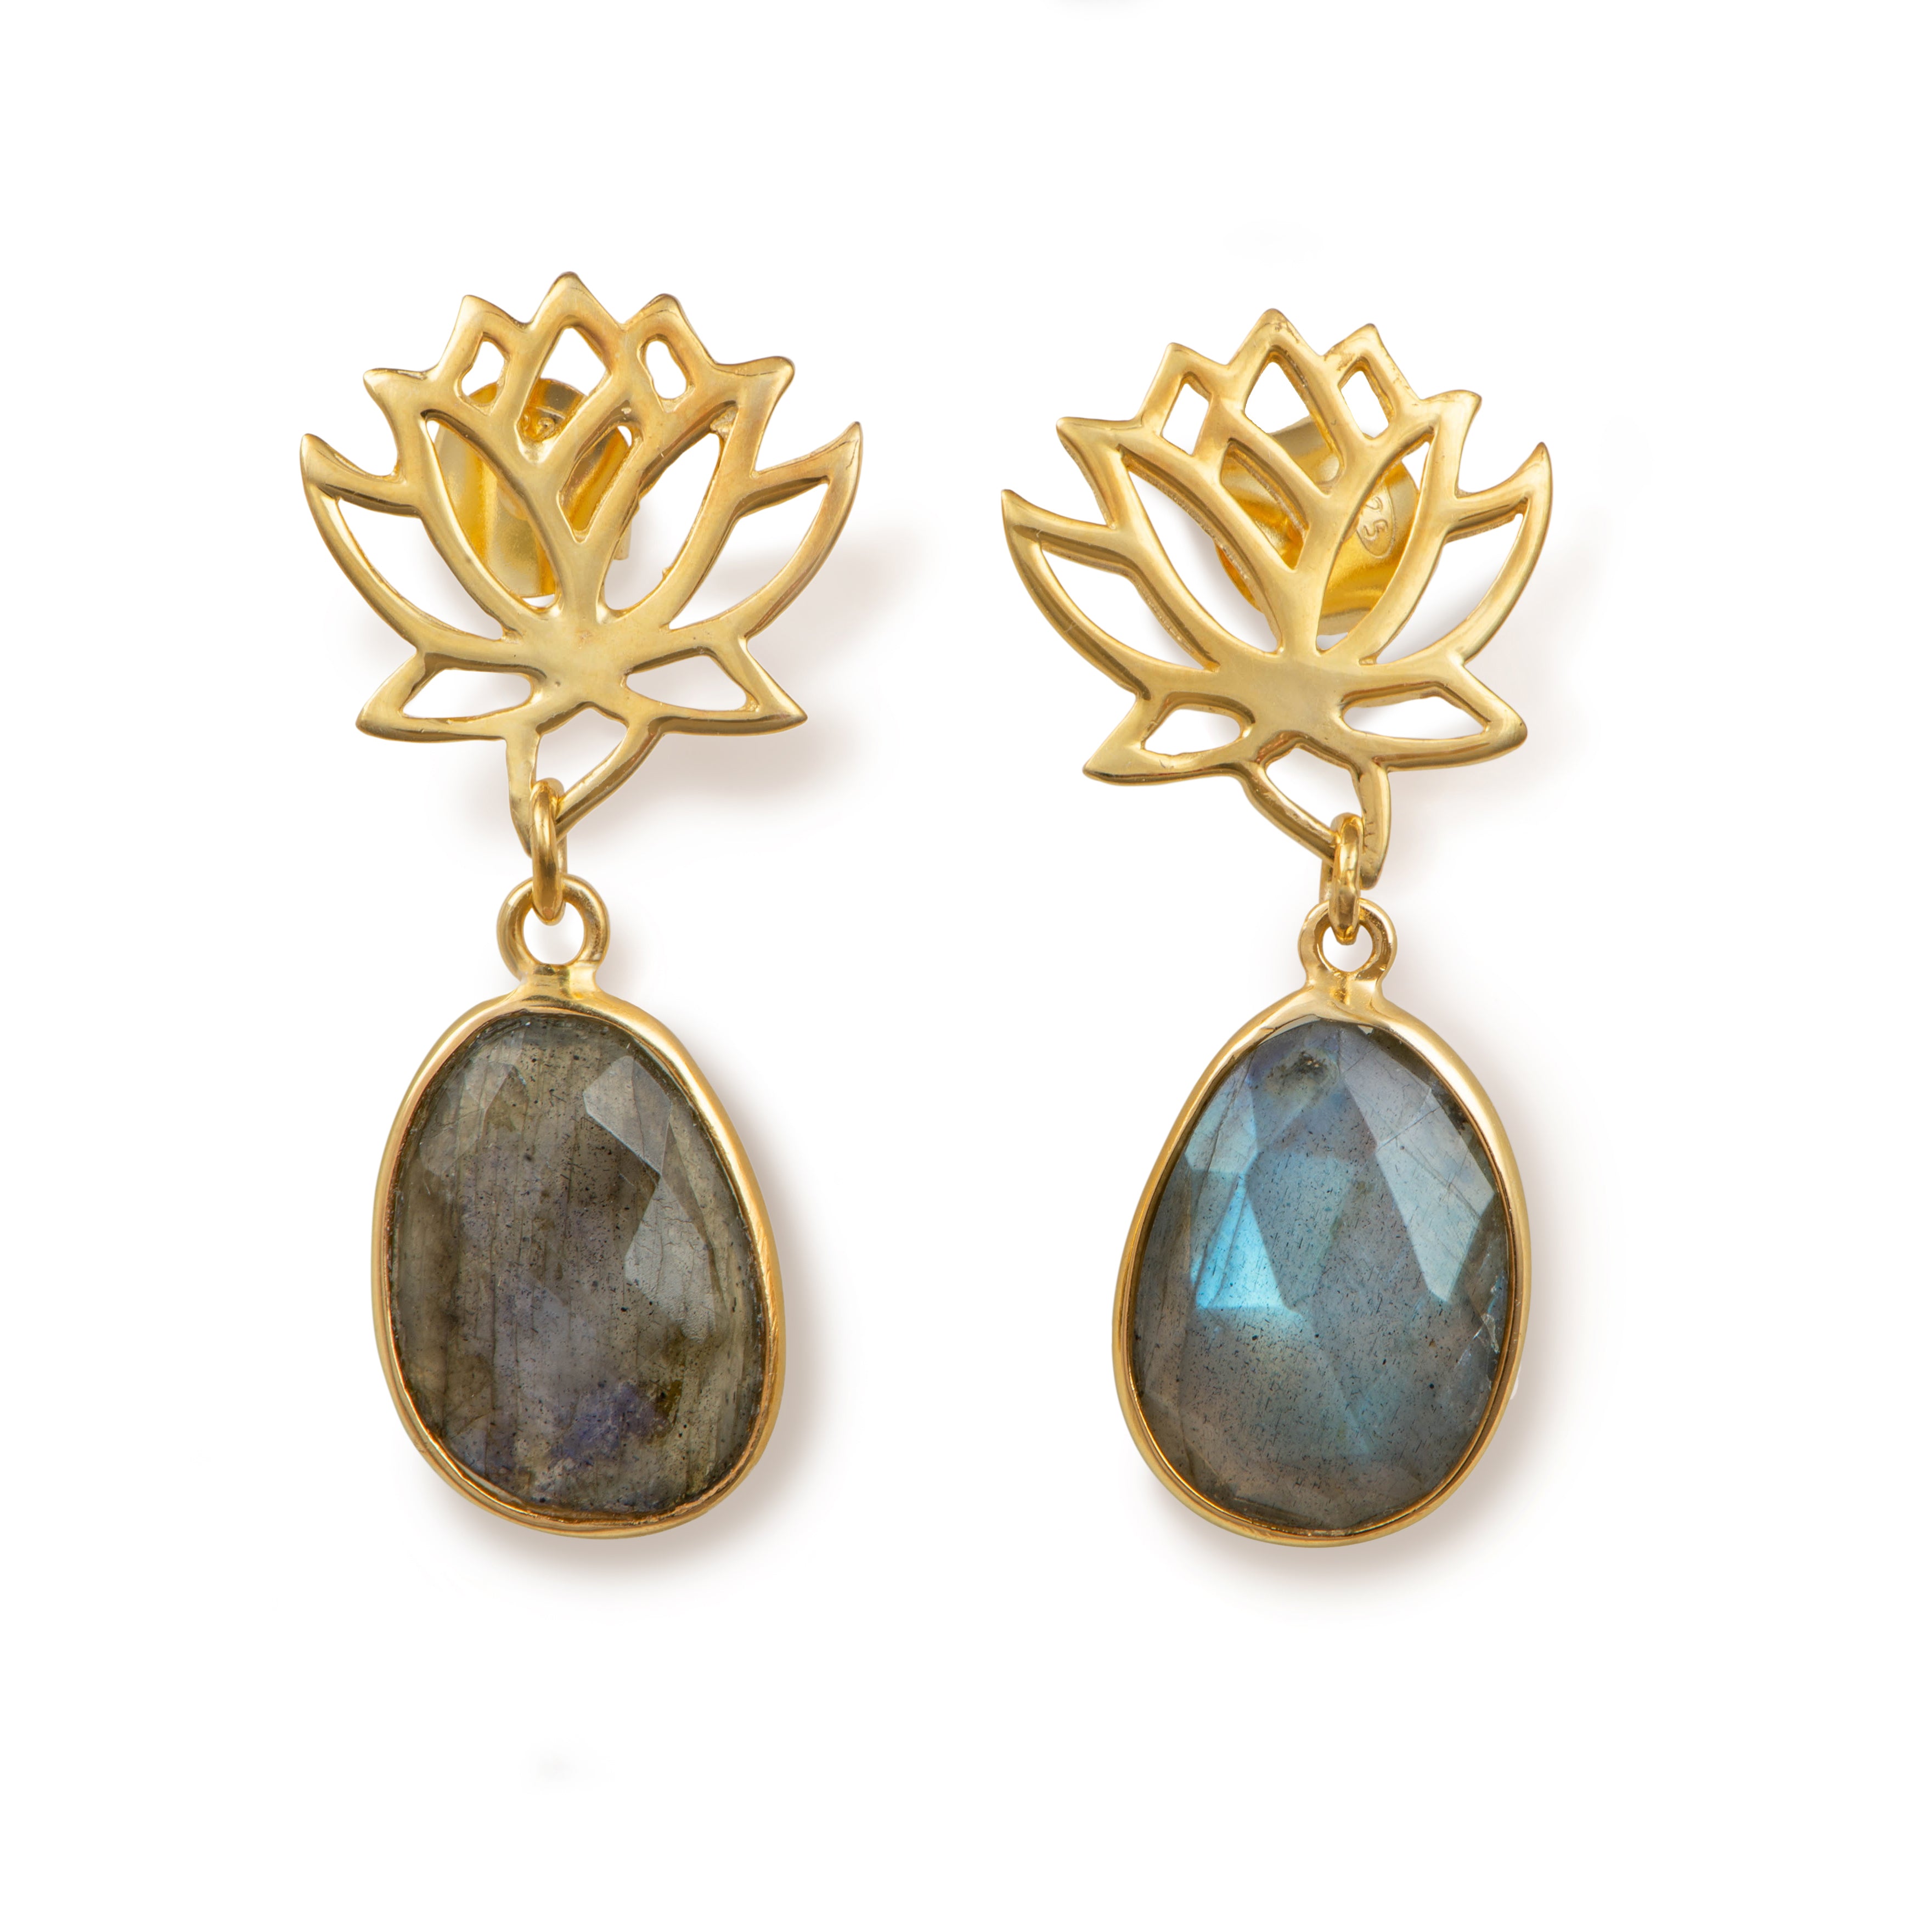 Lotus Earrings in Gold Plated Sterling Silver with a Labradorite Gemstone Drop